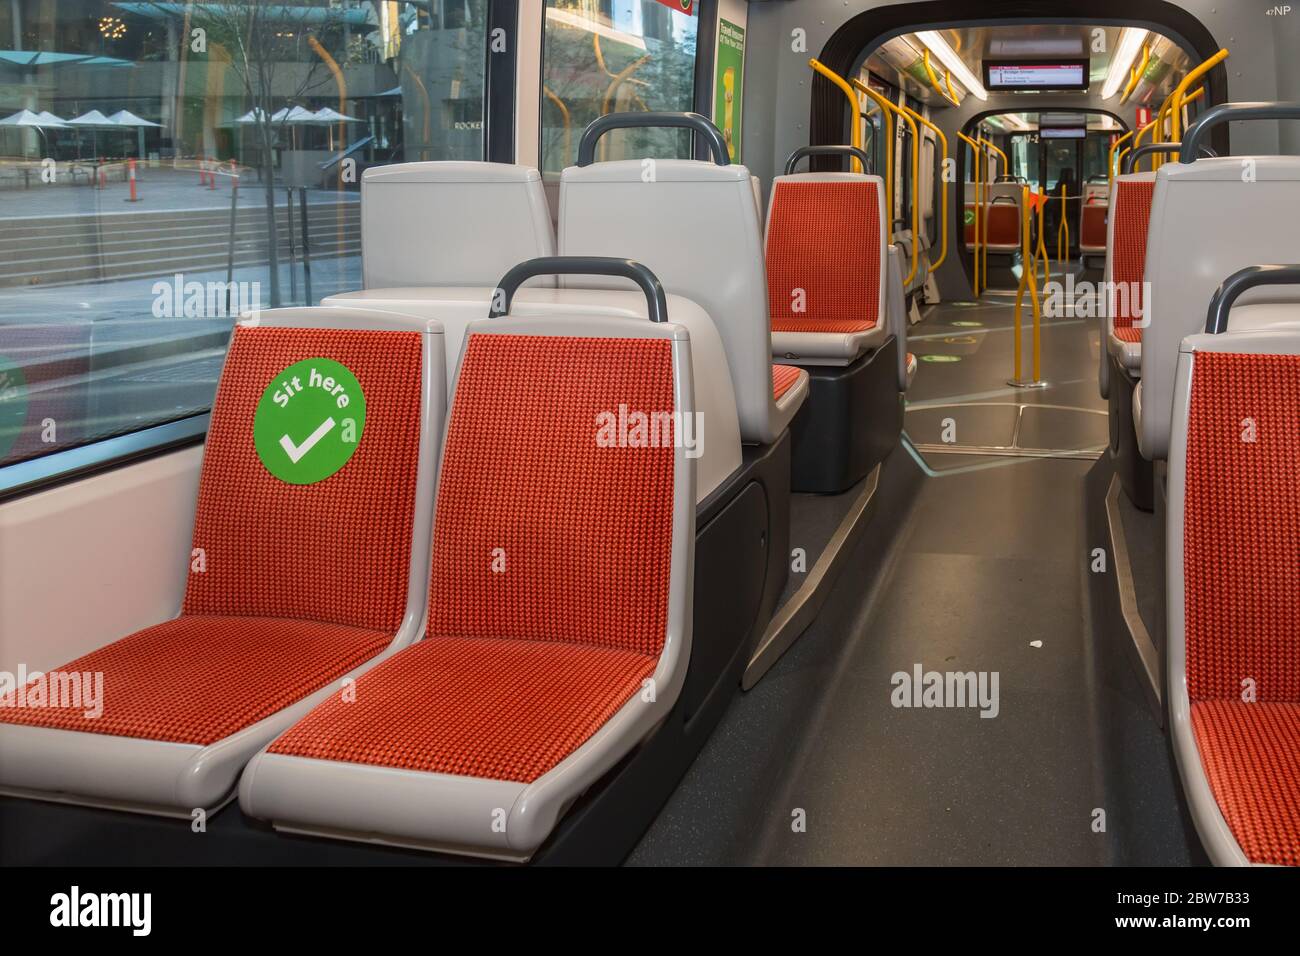 Sydney, Australia. Saturday 30th May 2020. A Sydney Tram at Circular Quay showing social distancing signage on seats and floor areas for passengers as Covid -19 resrictions ease. Credit Paul Lovelace/ Alamy Live News Stock Photo